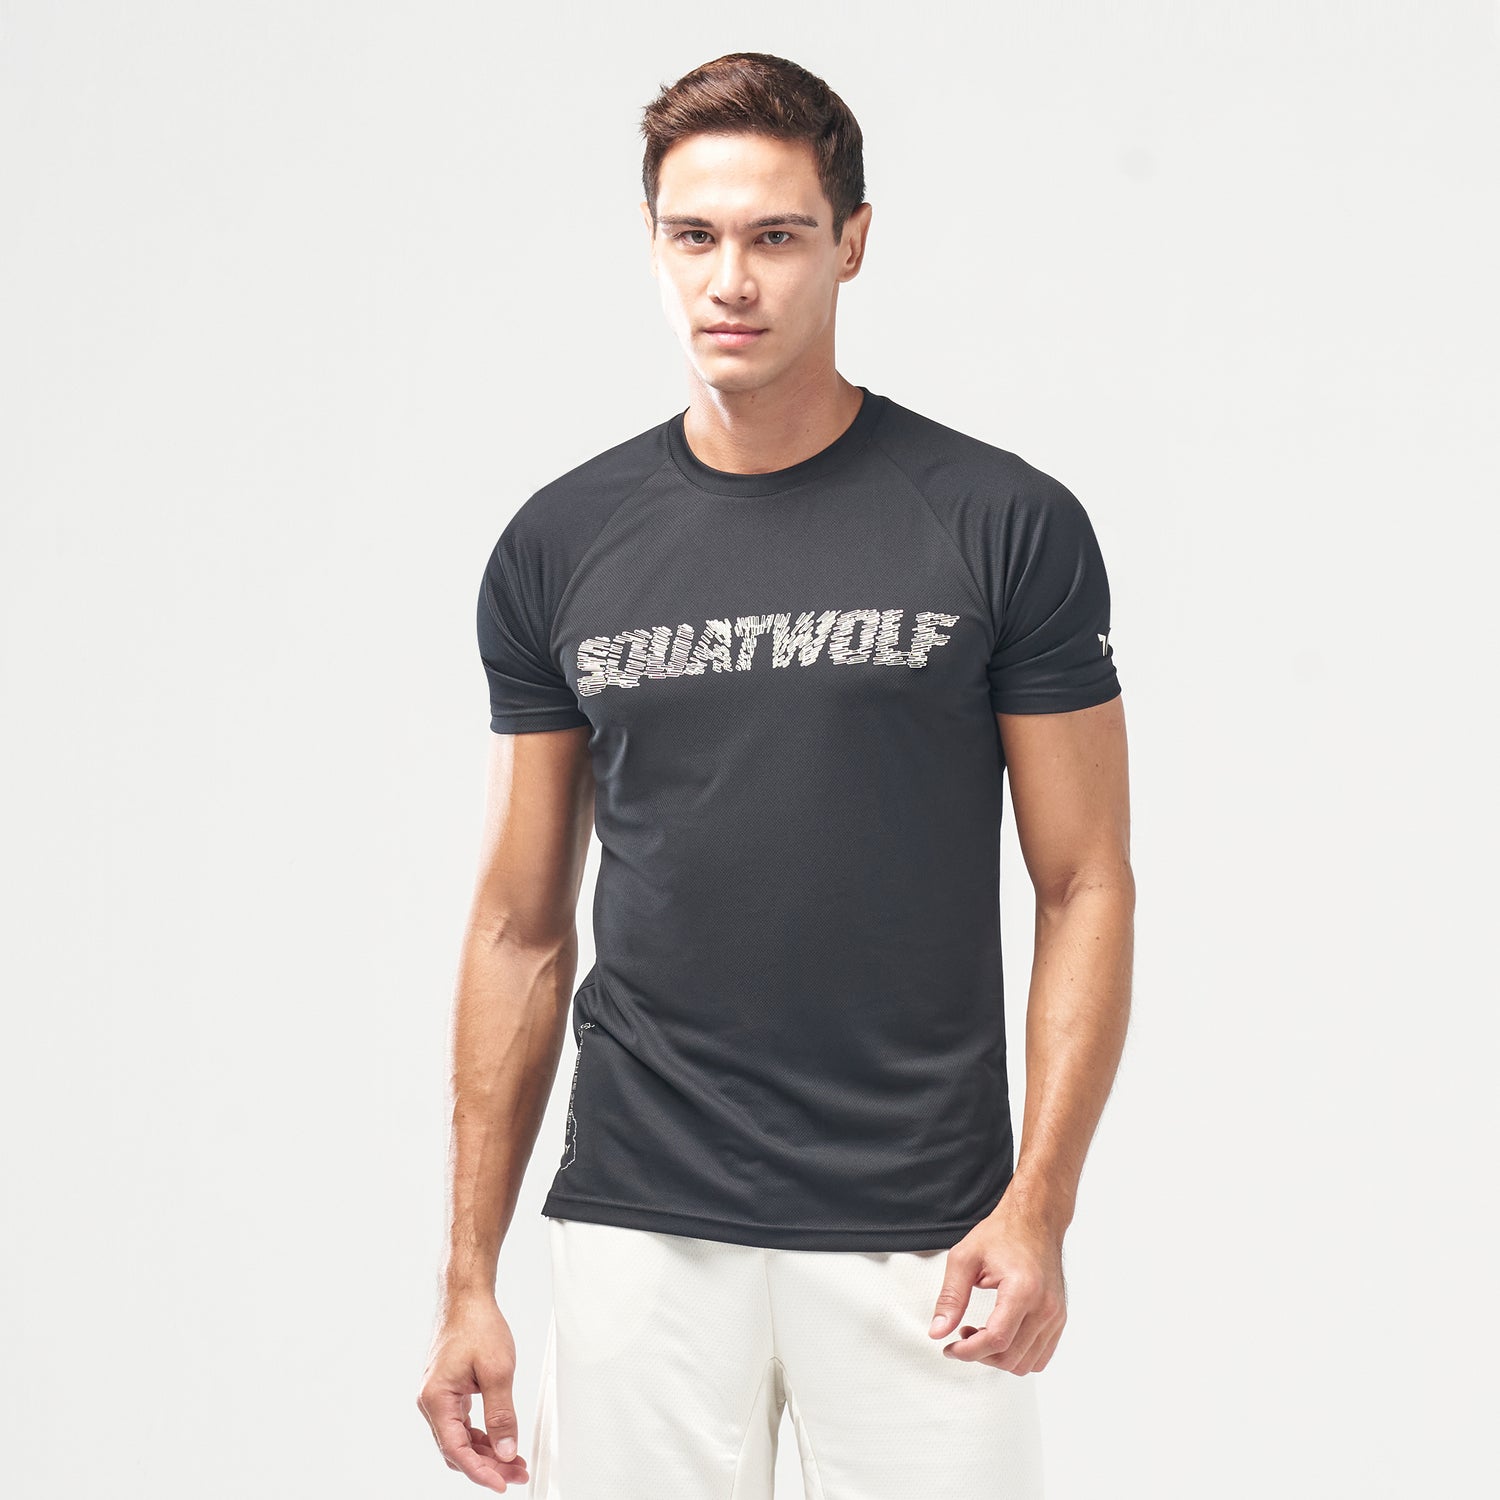 squatwolf-gym-wear-code-logo-muscle-tee-black-workout-shirts-for-men